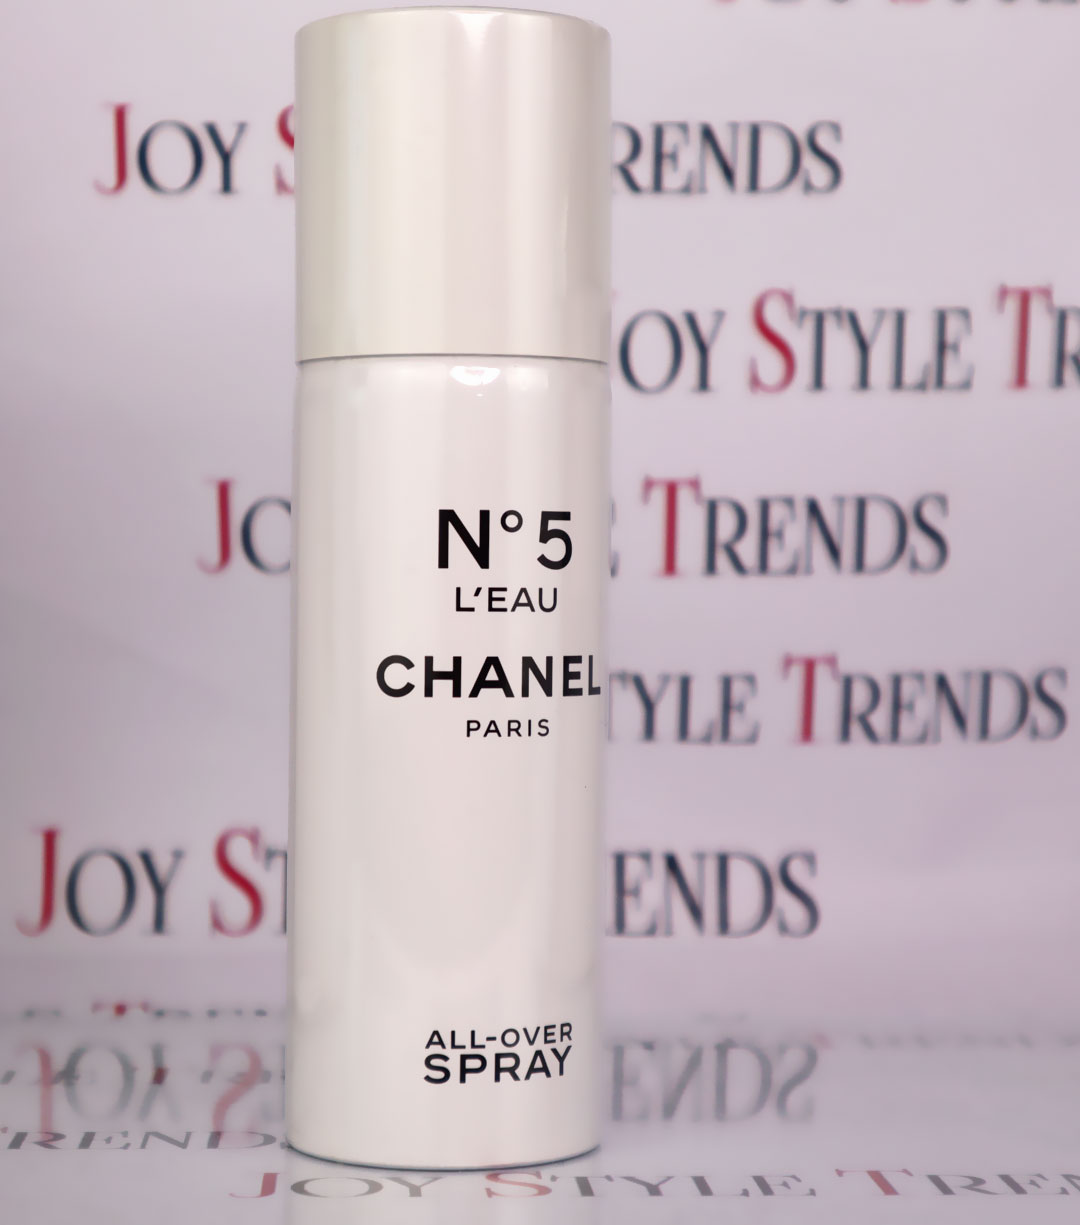 CHANEL N°5 L'EAU ALL - OVER Spray, Photo Of Joy Style Trends Media